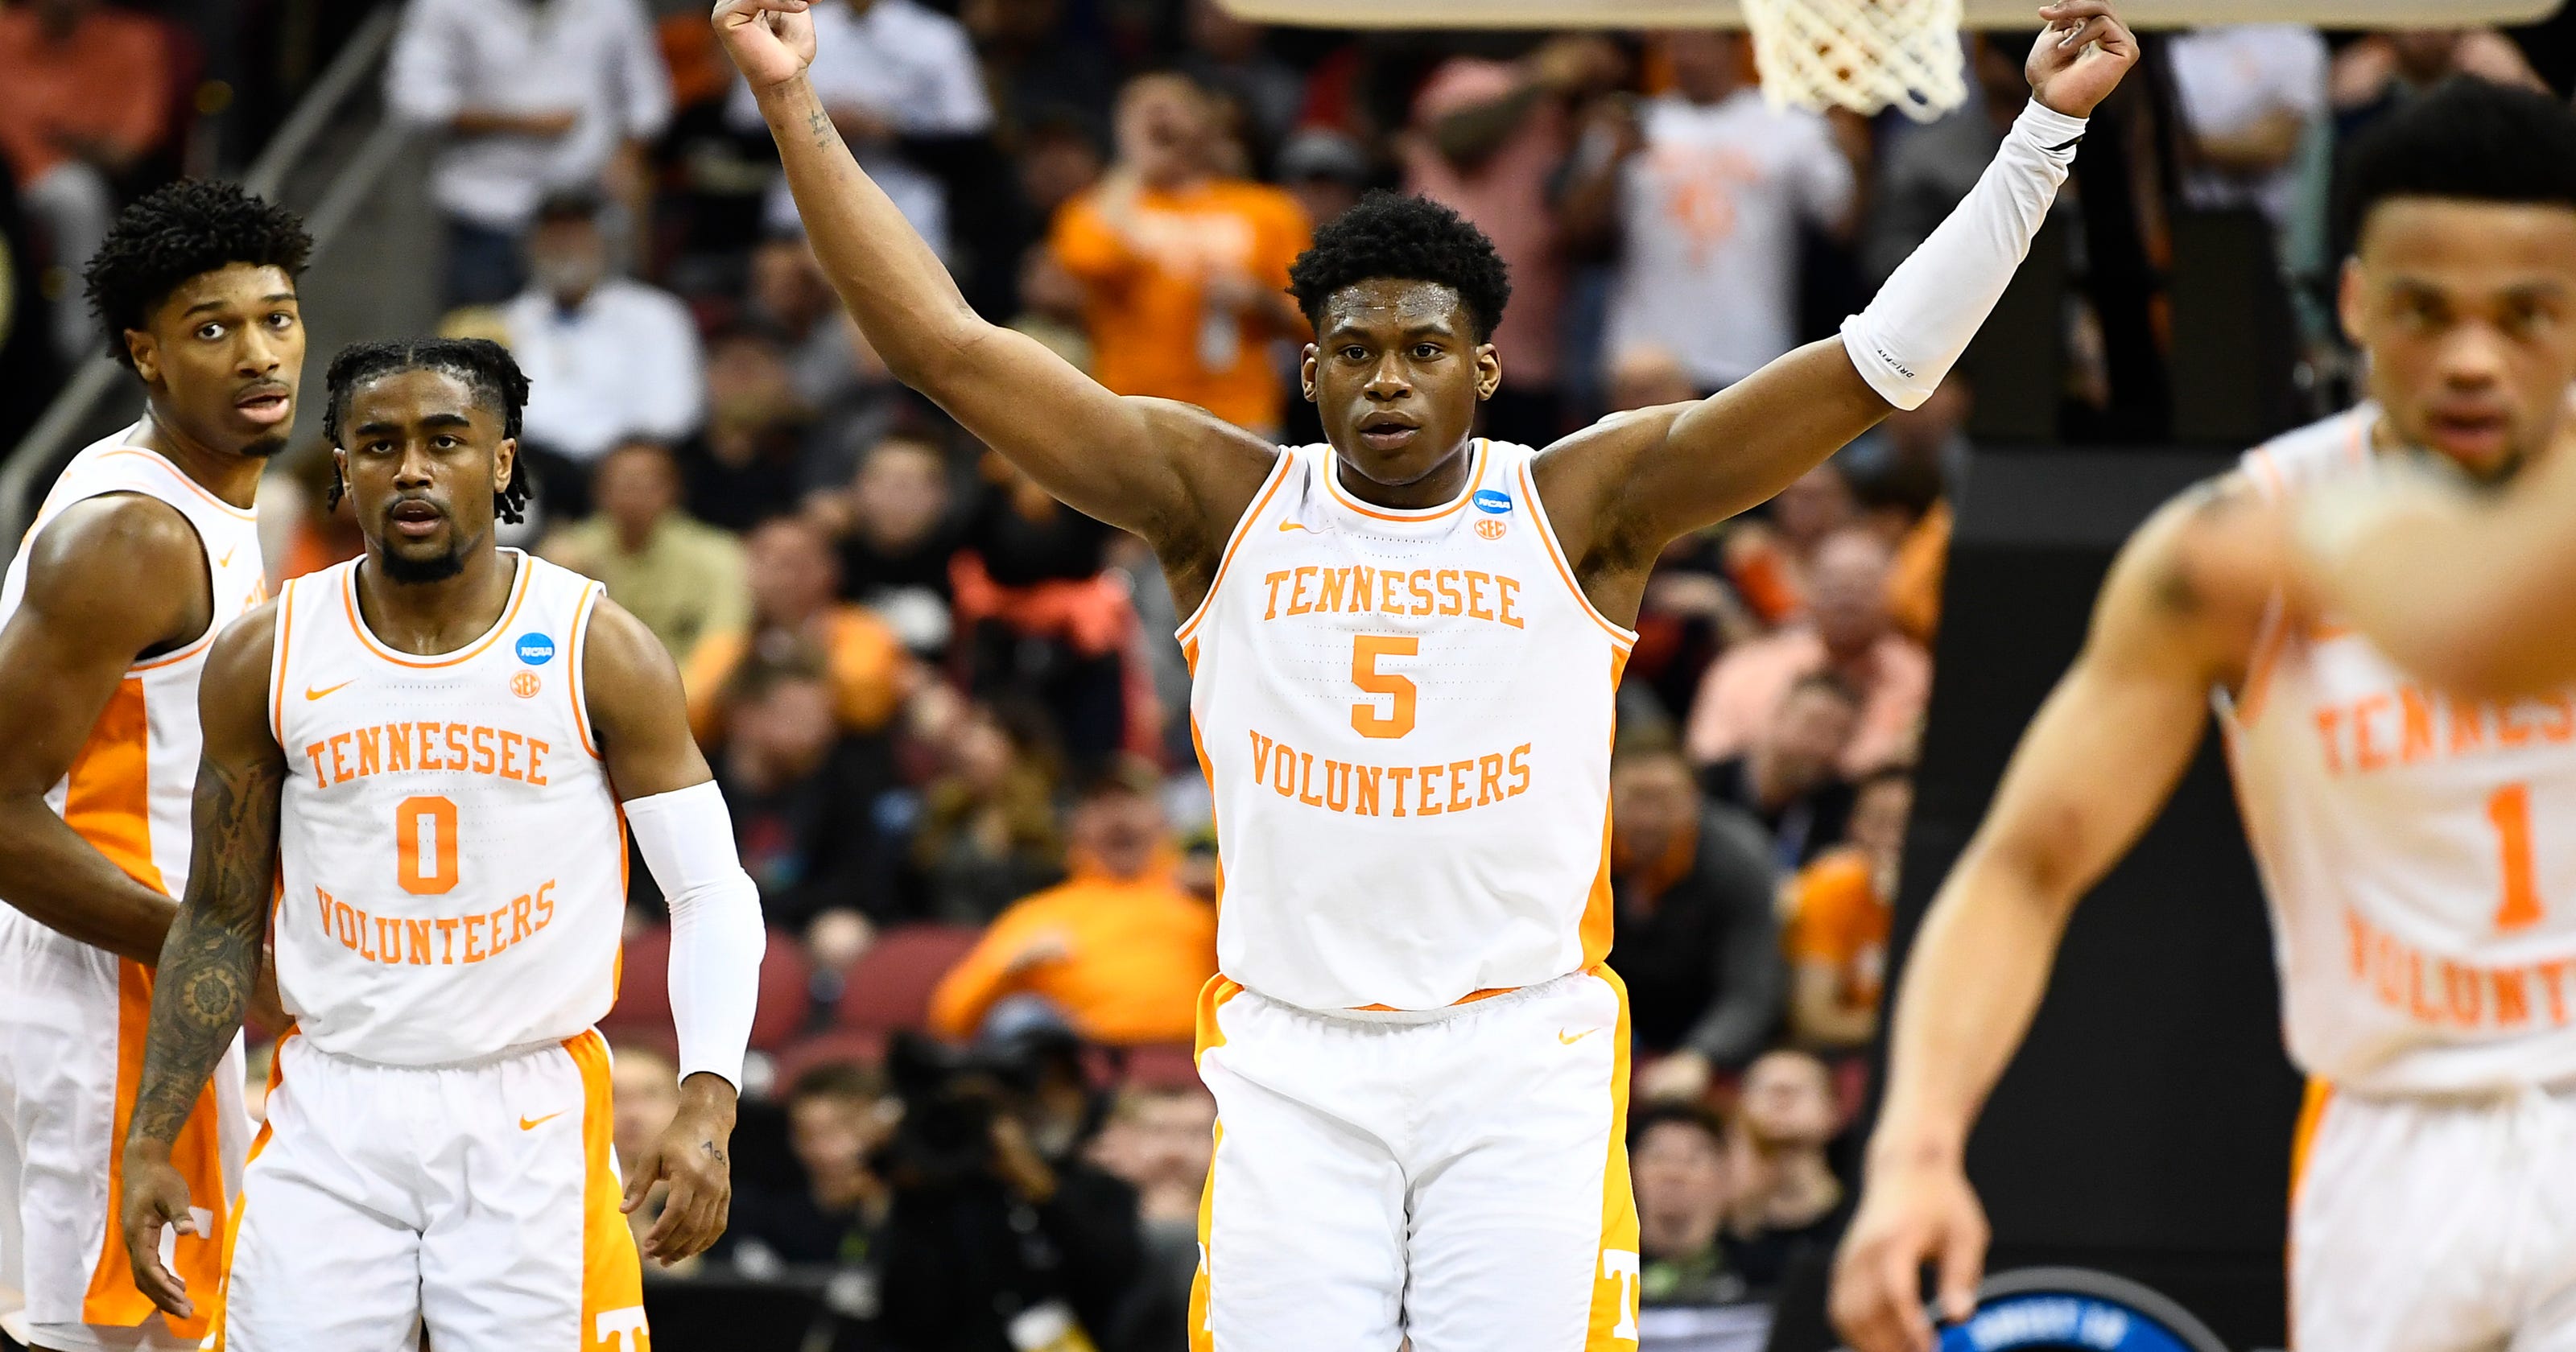 Tennessee basketball: What Admiral Schofield said after Purdue loss